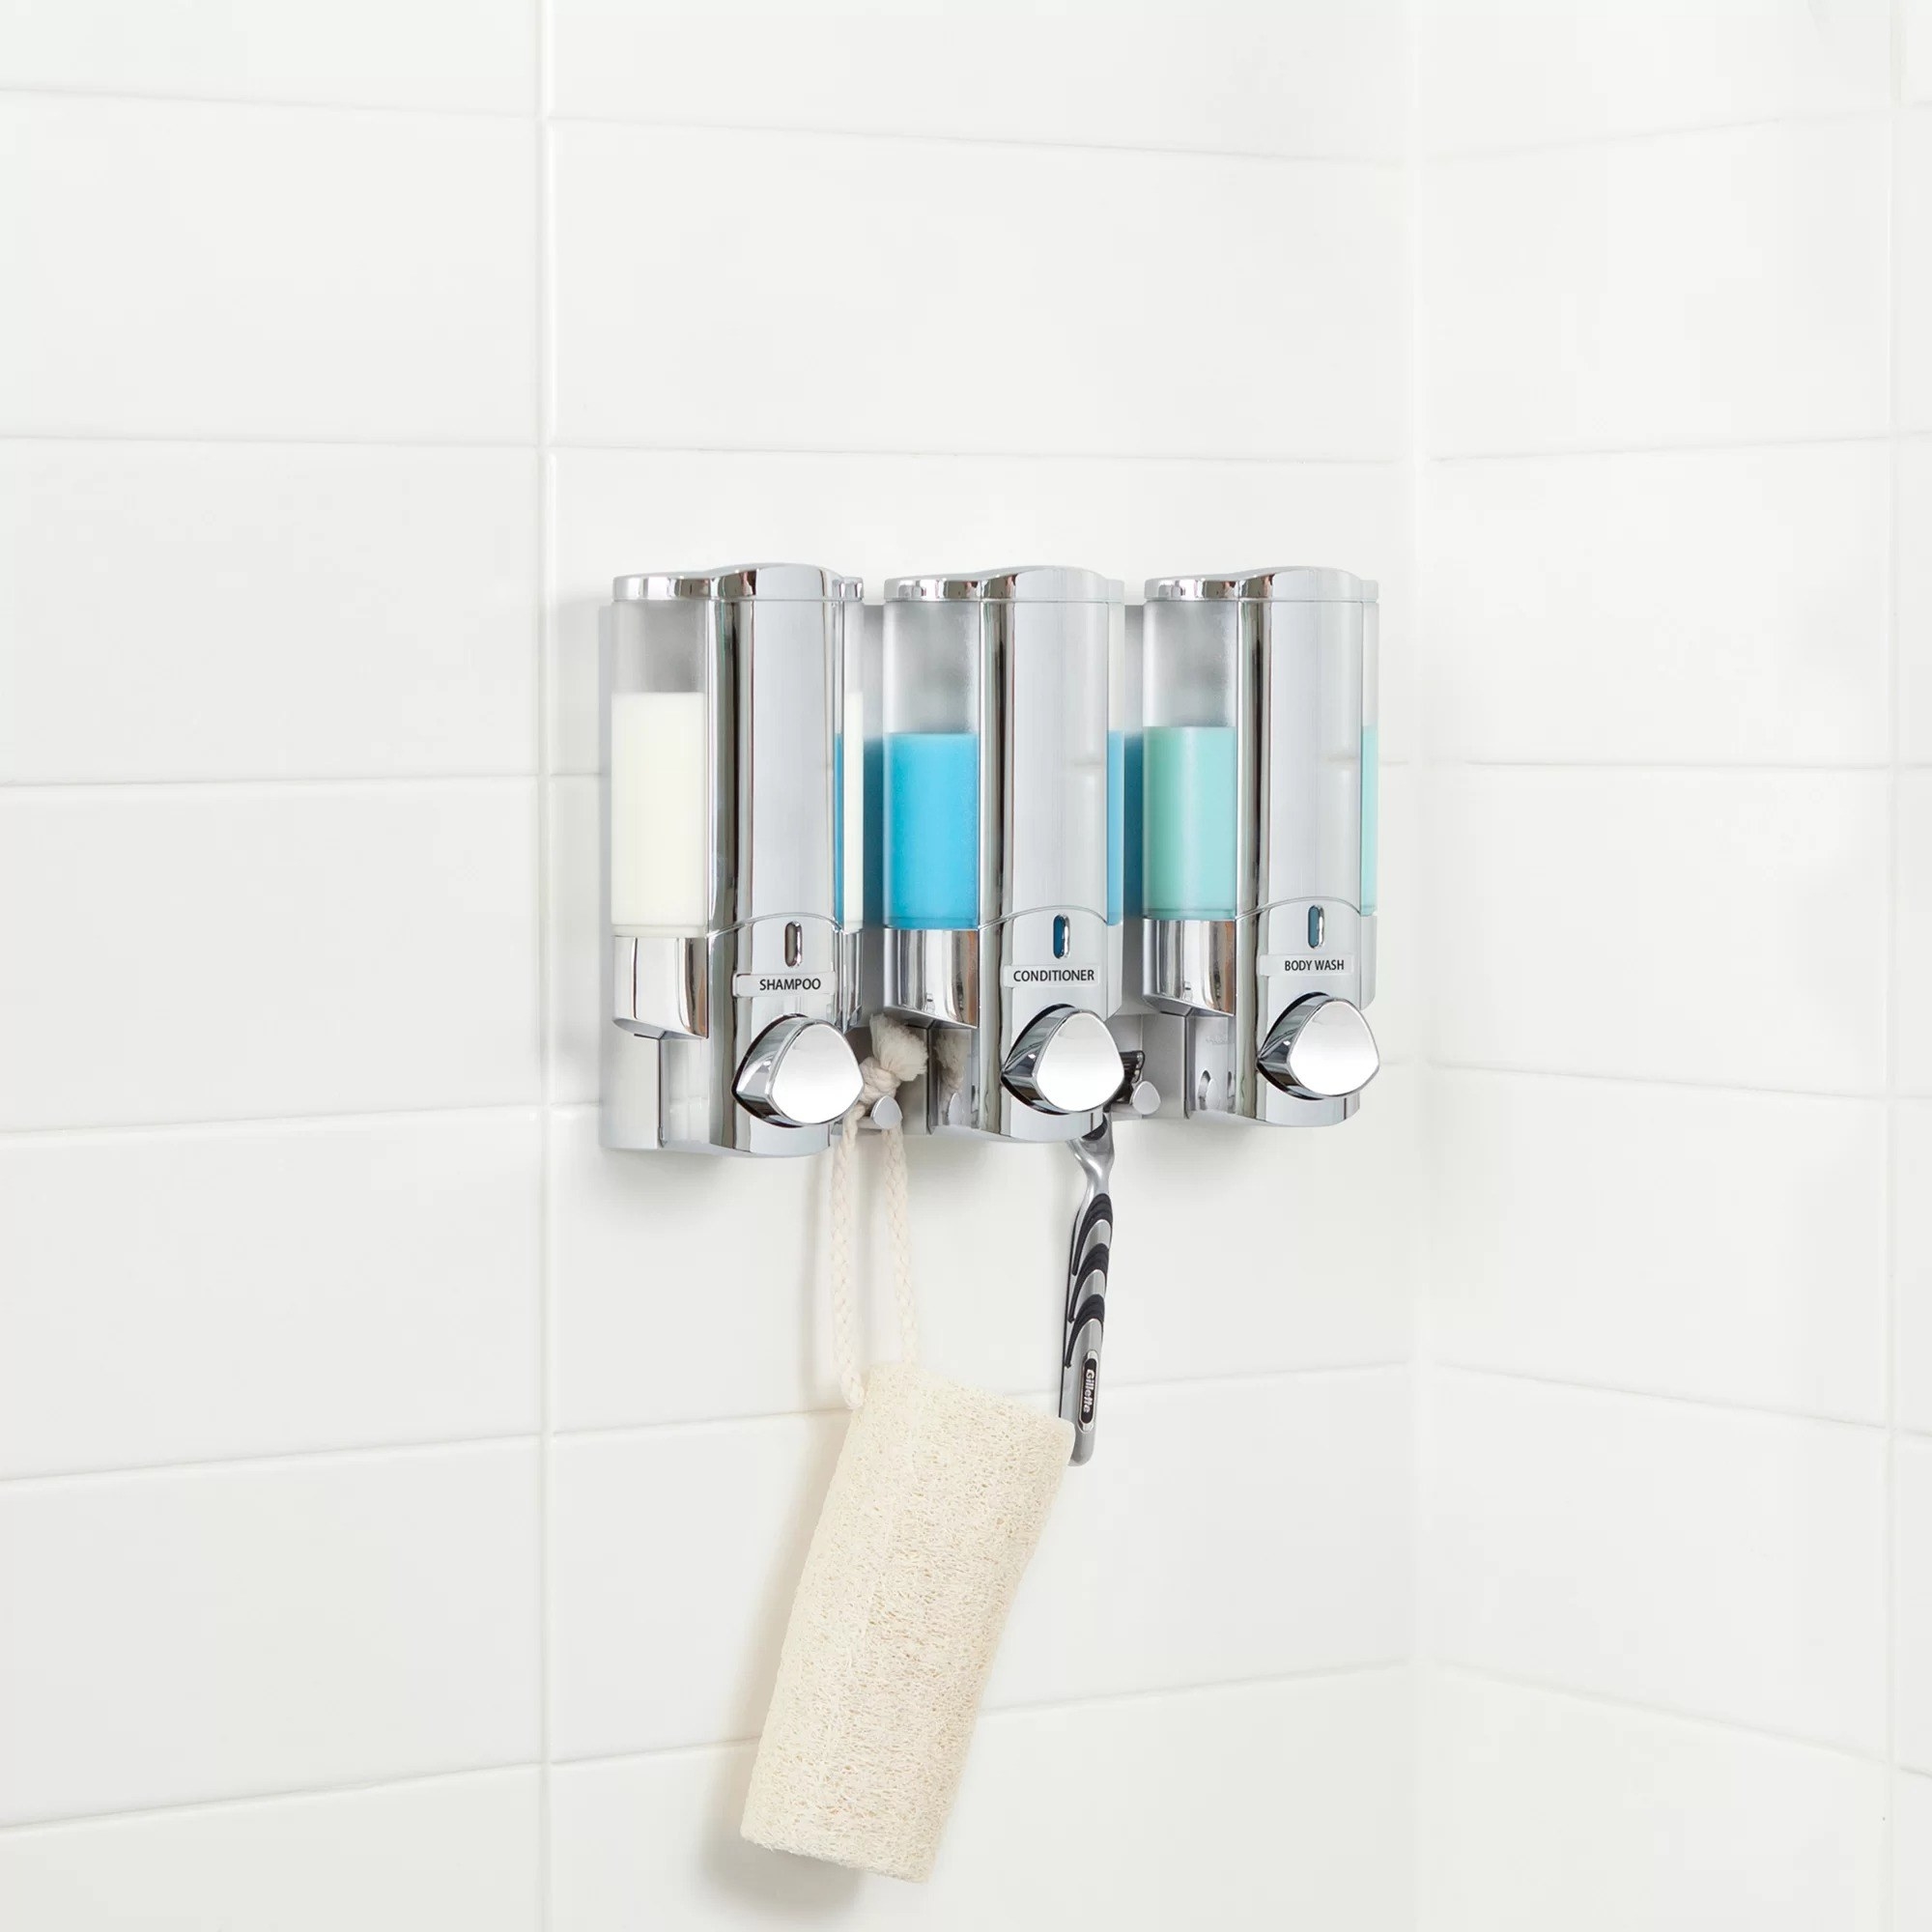 The soap dispenser with hooks mounted in a shower